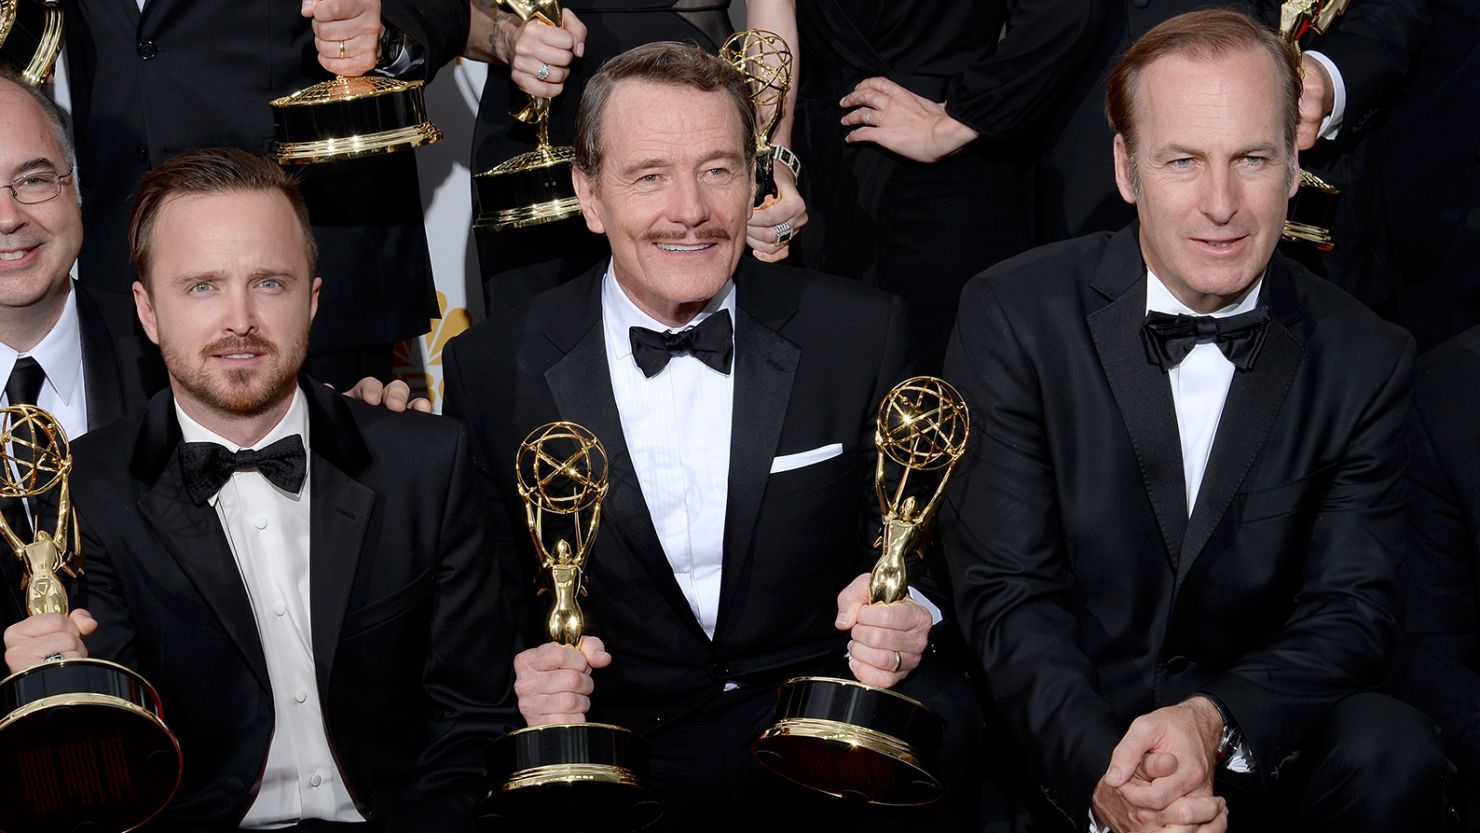 Aaron Paul, Bryan Cranston, and Bob Odenkirk, winners of Outstanding Drama Series for "Breaking Bad," pose during the 66th Annual Primetime Emmy Awards on August 25, 2014. 